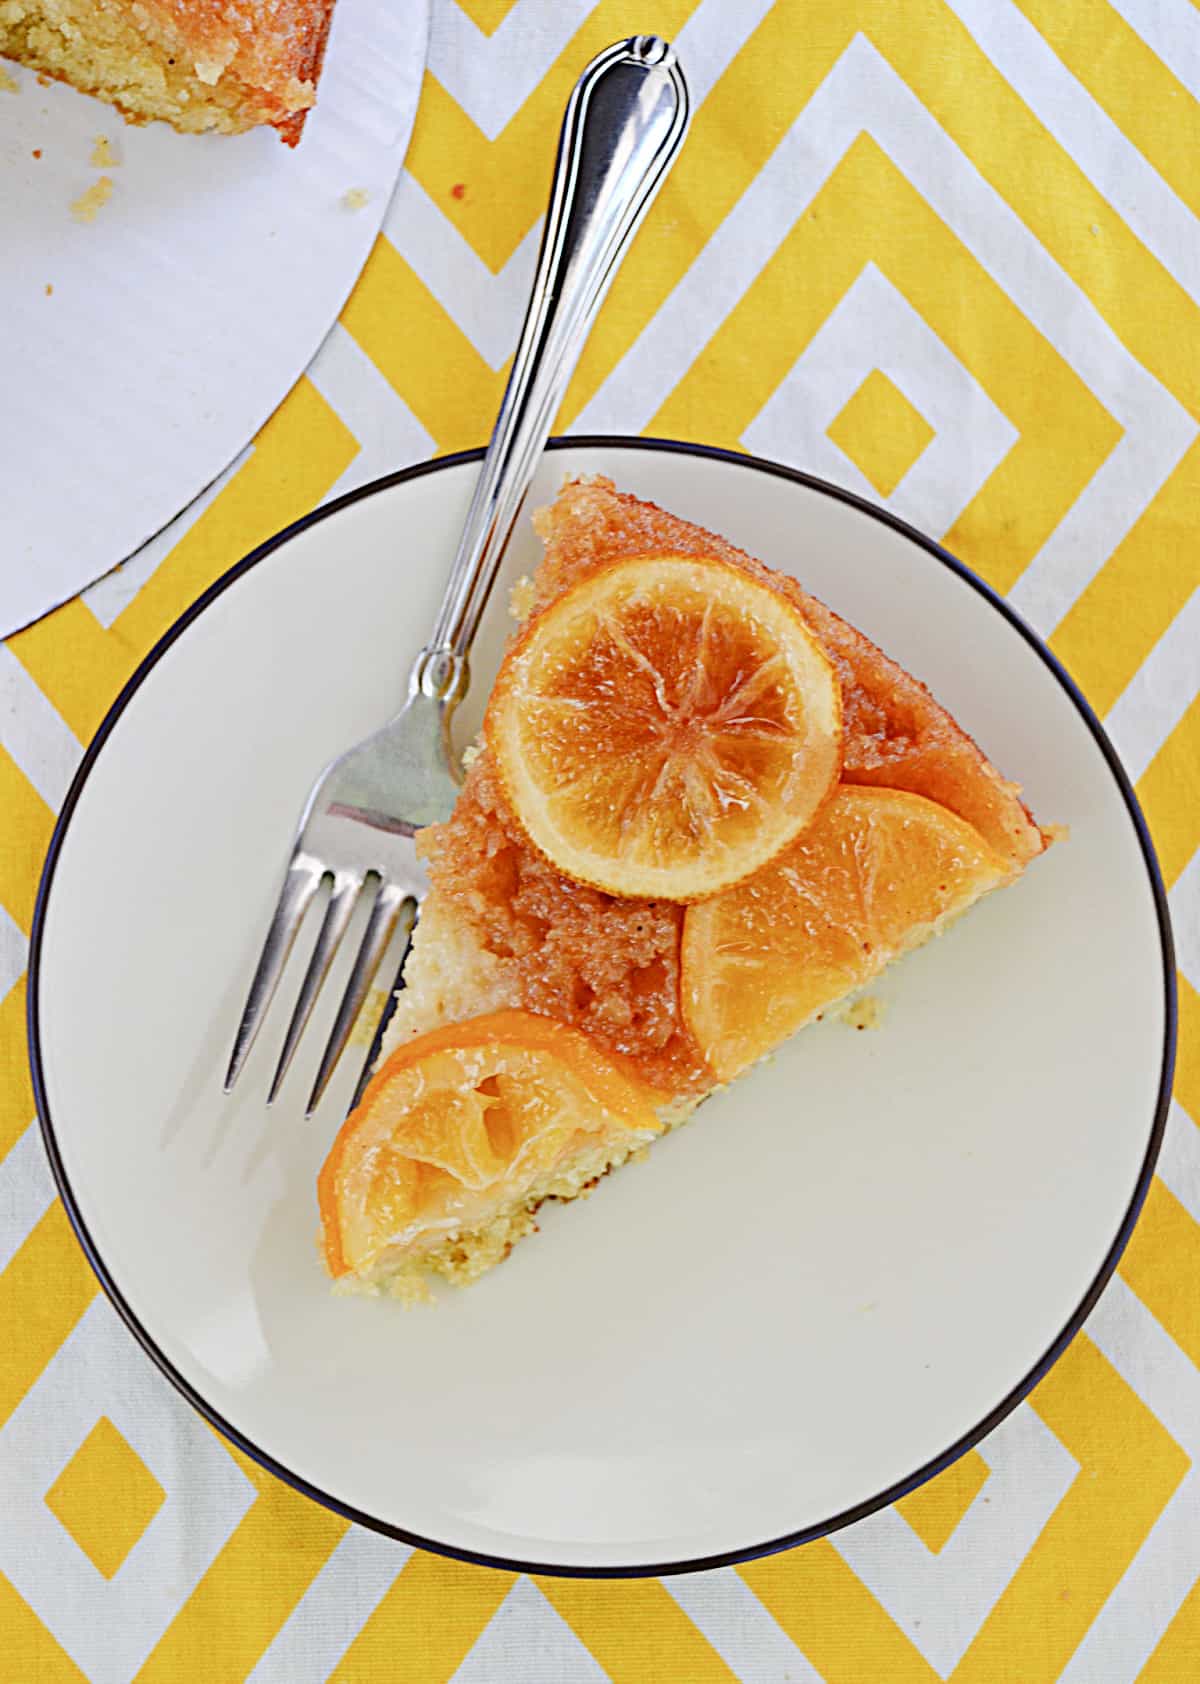 A slice of lemon upside down cake with a fork next to it.